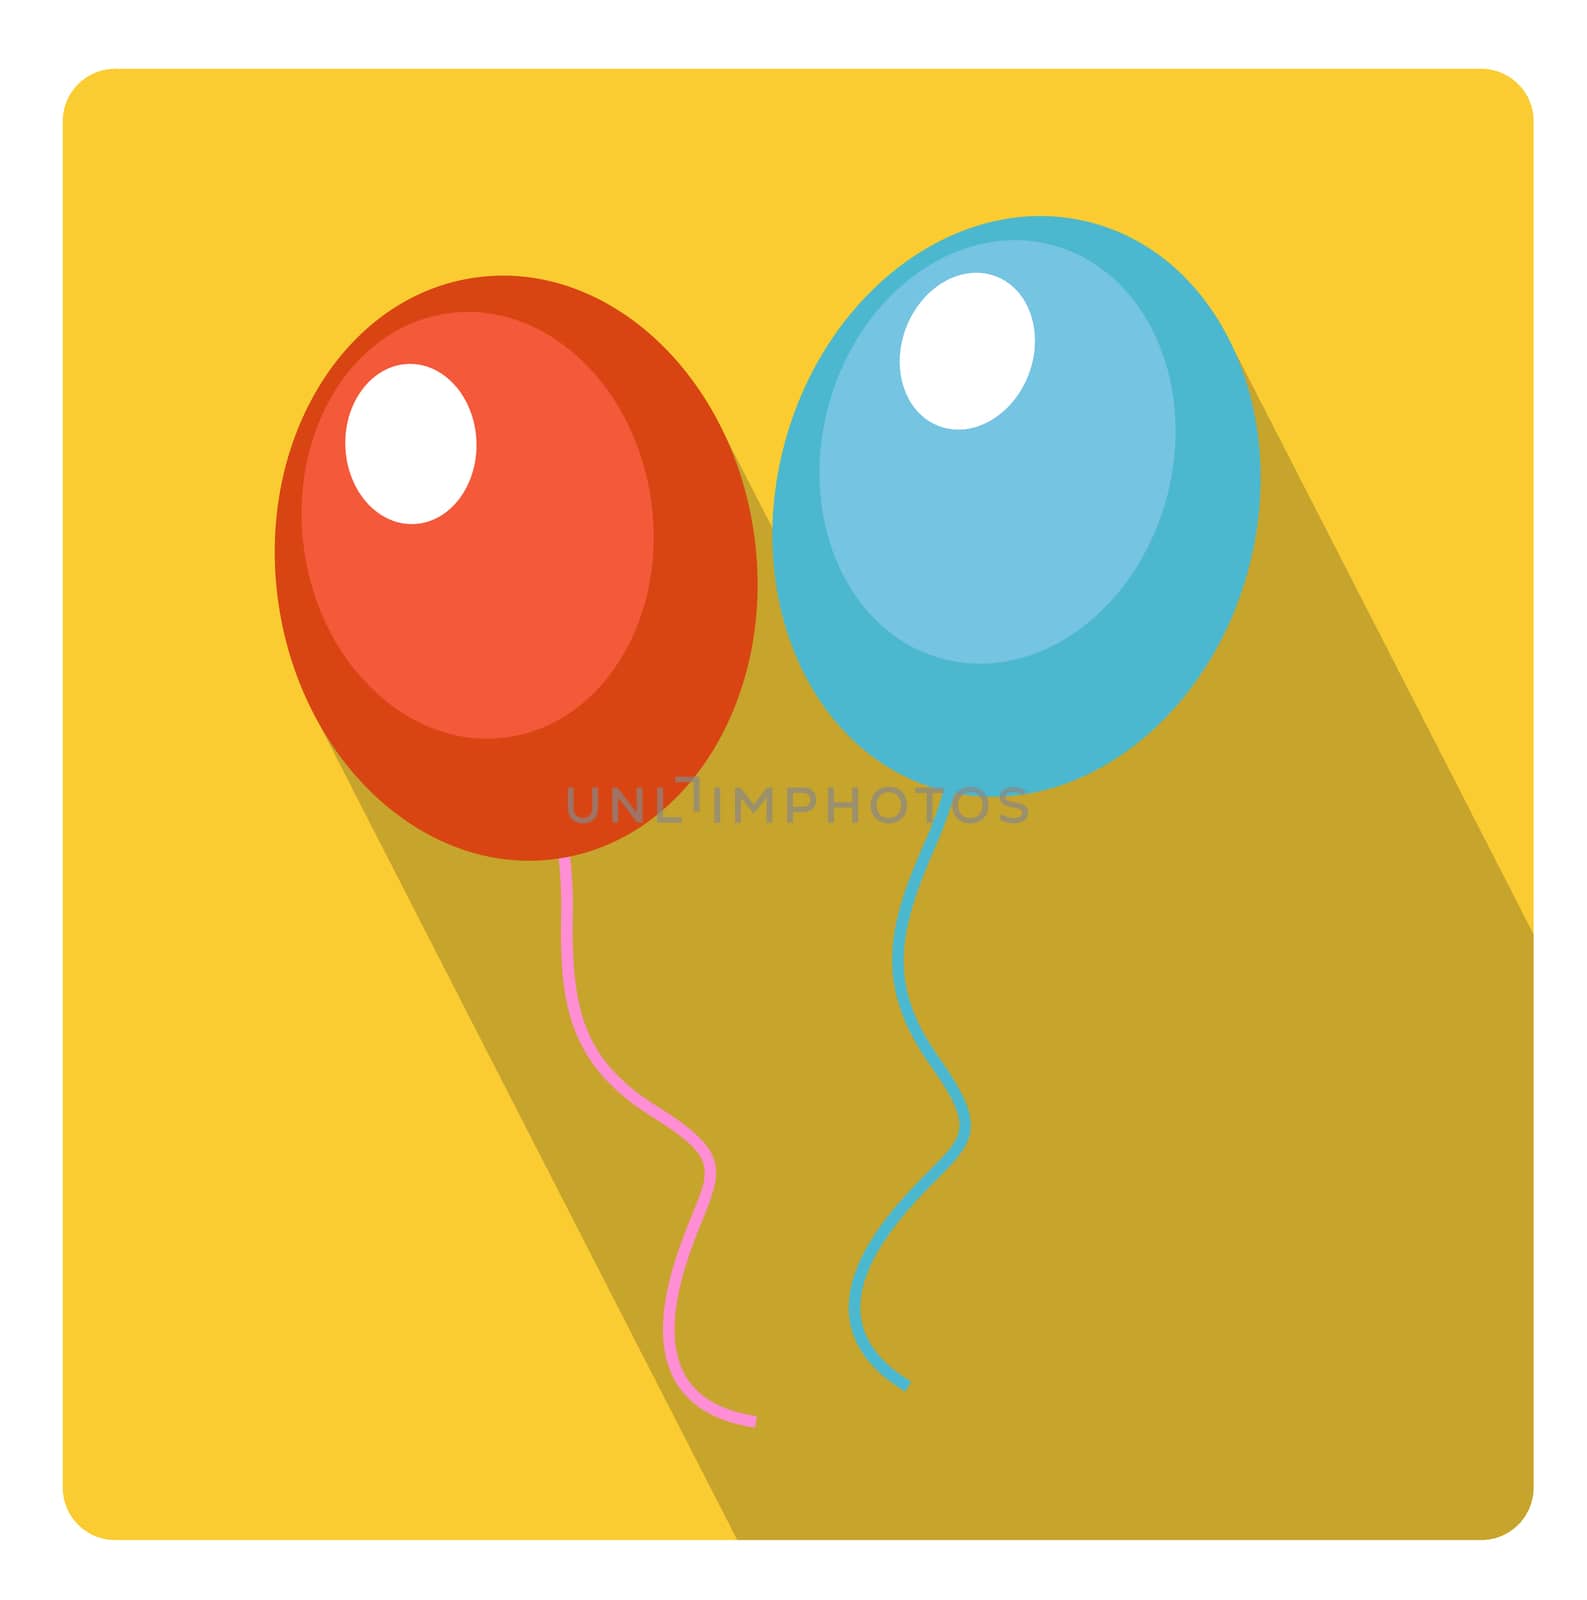 Balloons for celebration icon flat style with long shadows, isolated on white background. illustration. by lucia_fox